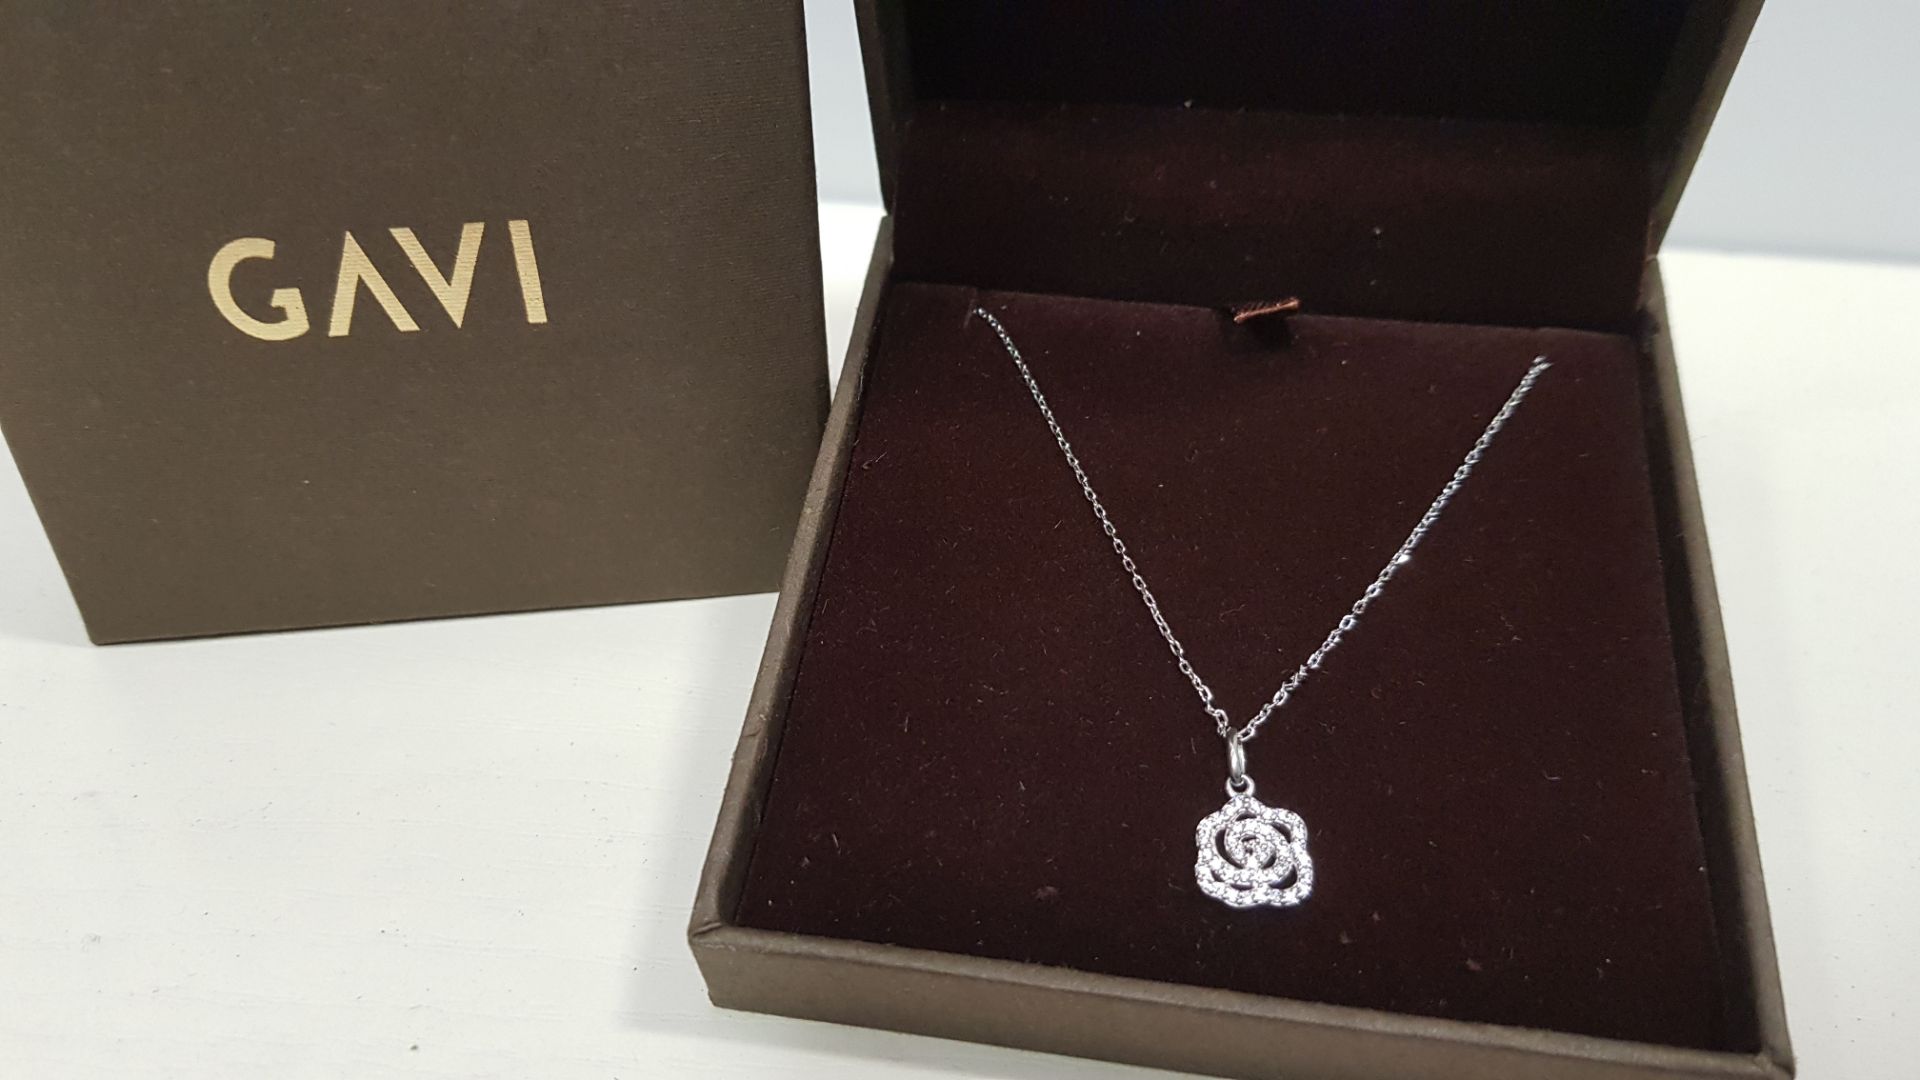 16 X BRAND NEW INDIVIDUALLY BOXED GAVI SILVER COLOURED NECKLACE WITH PENDANT